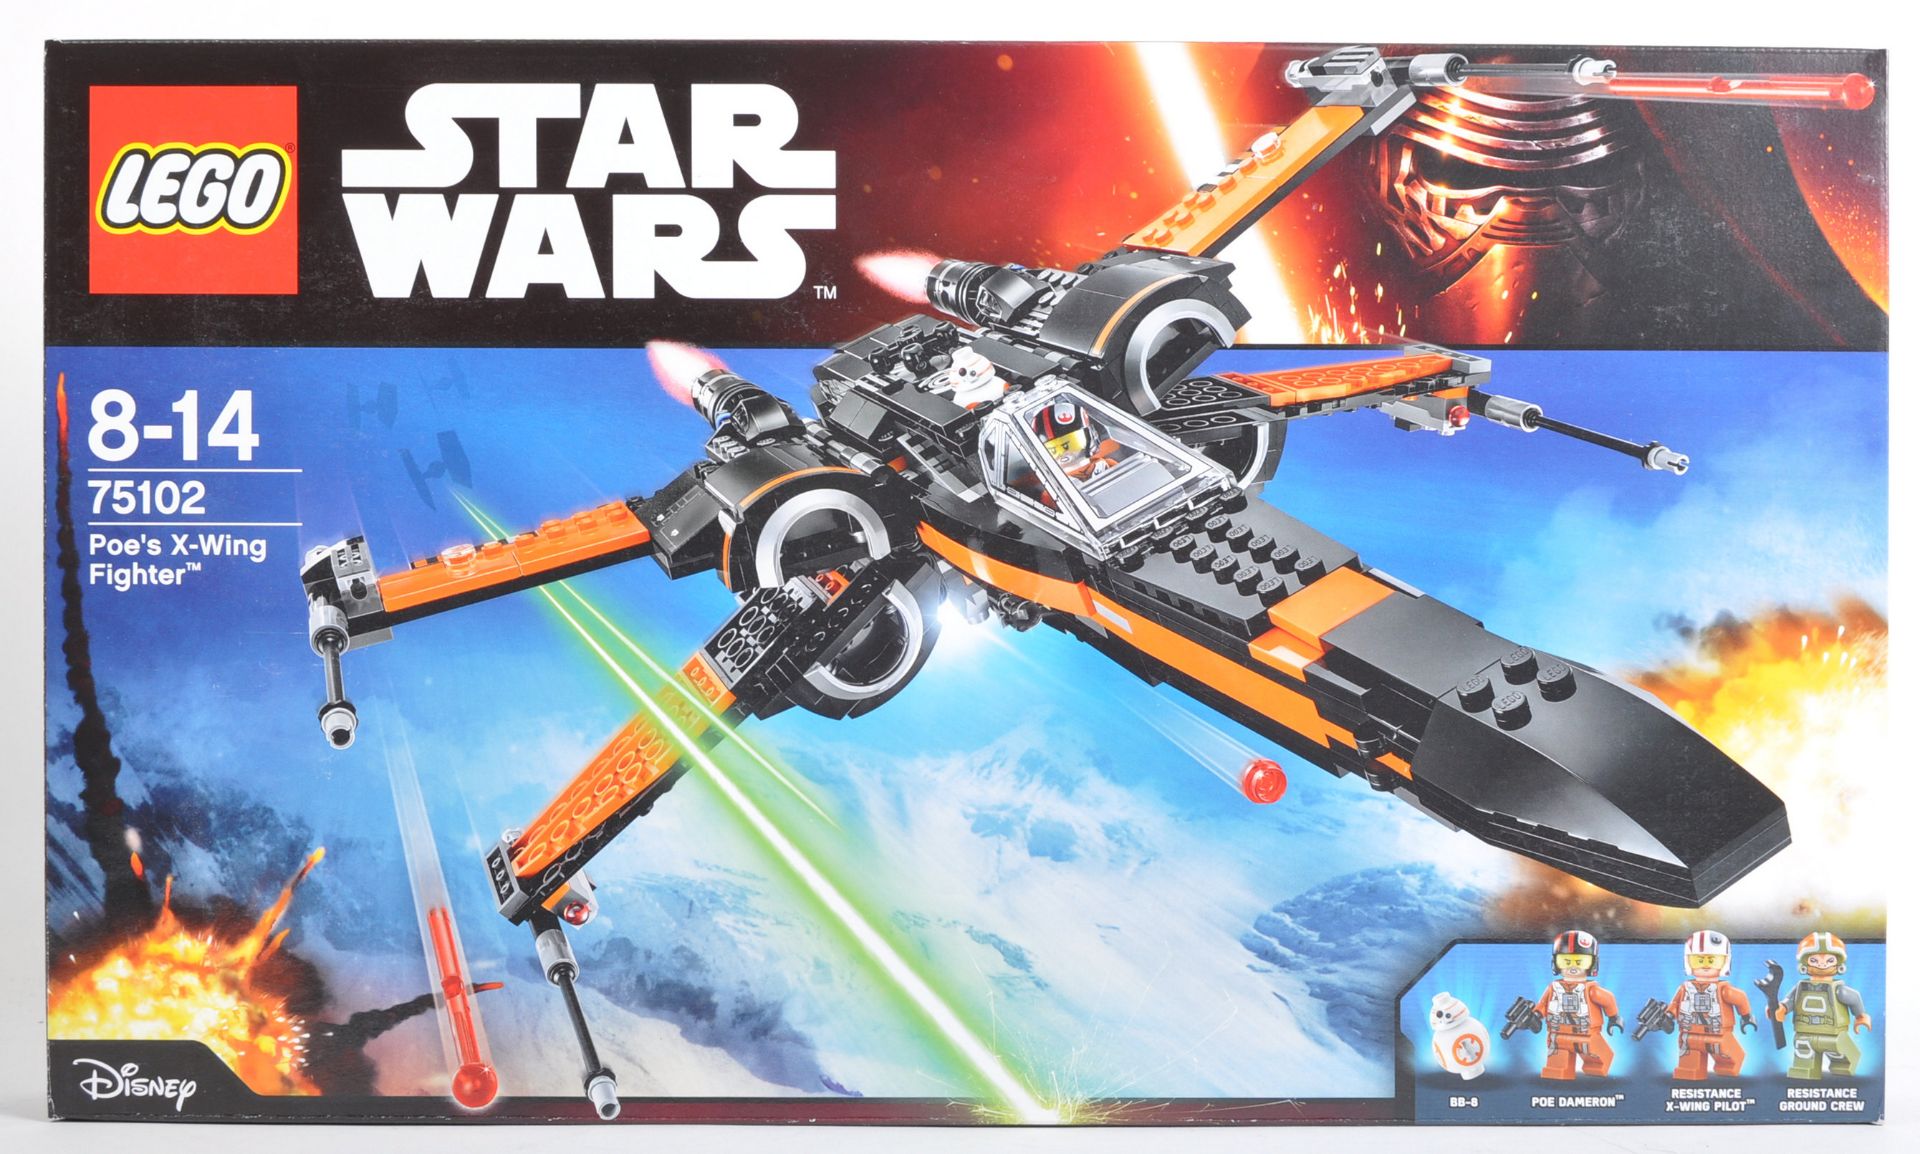 LEGO SET - LEGO STAR WARS - 75102 - POE'S X-WING FIGHTER